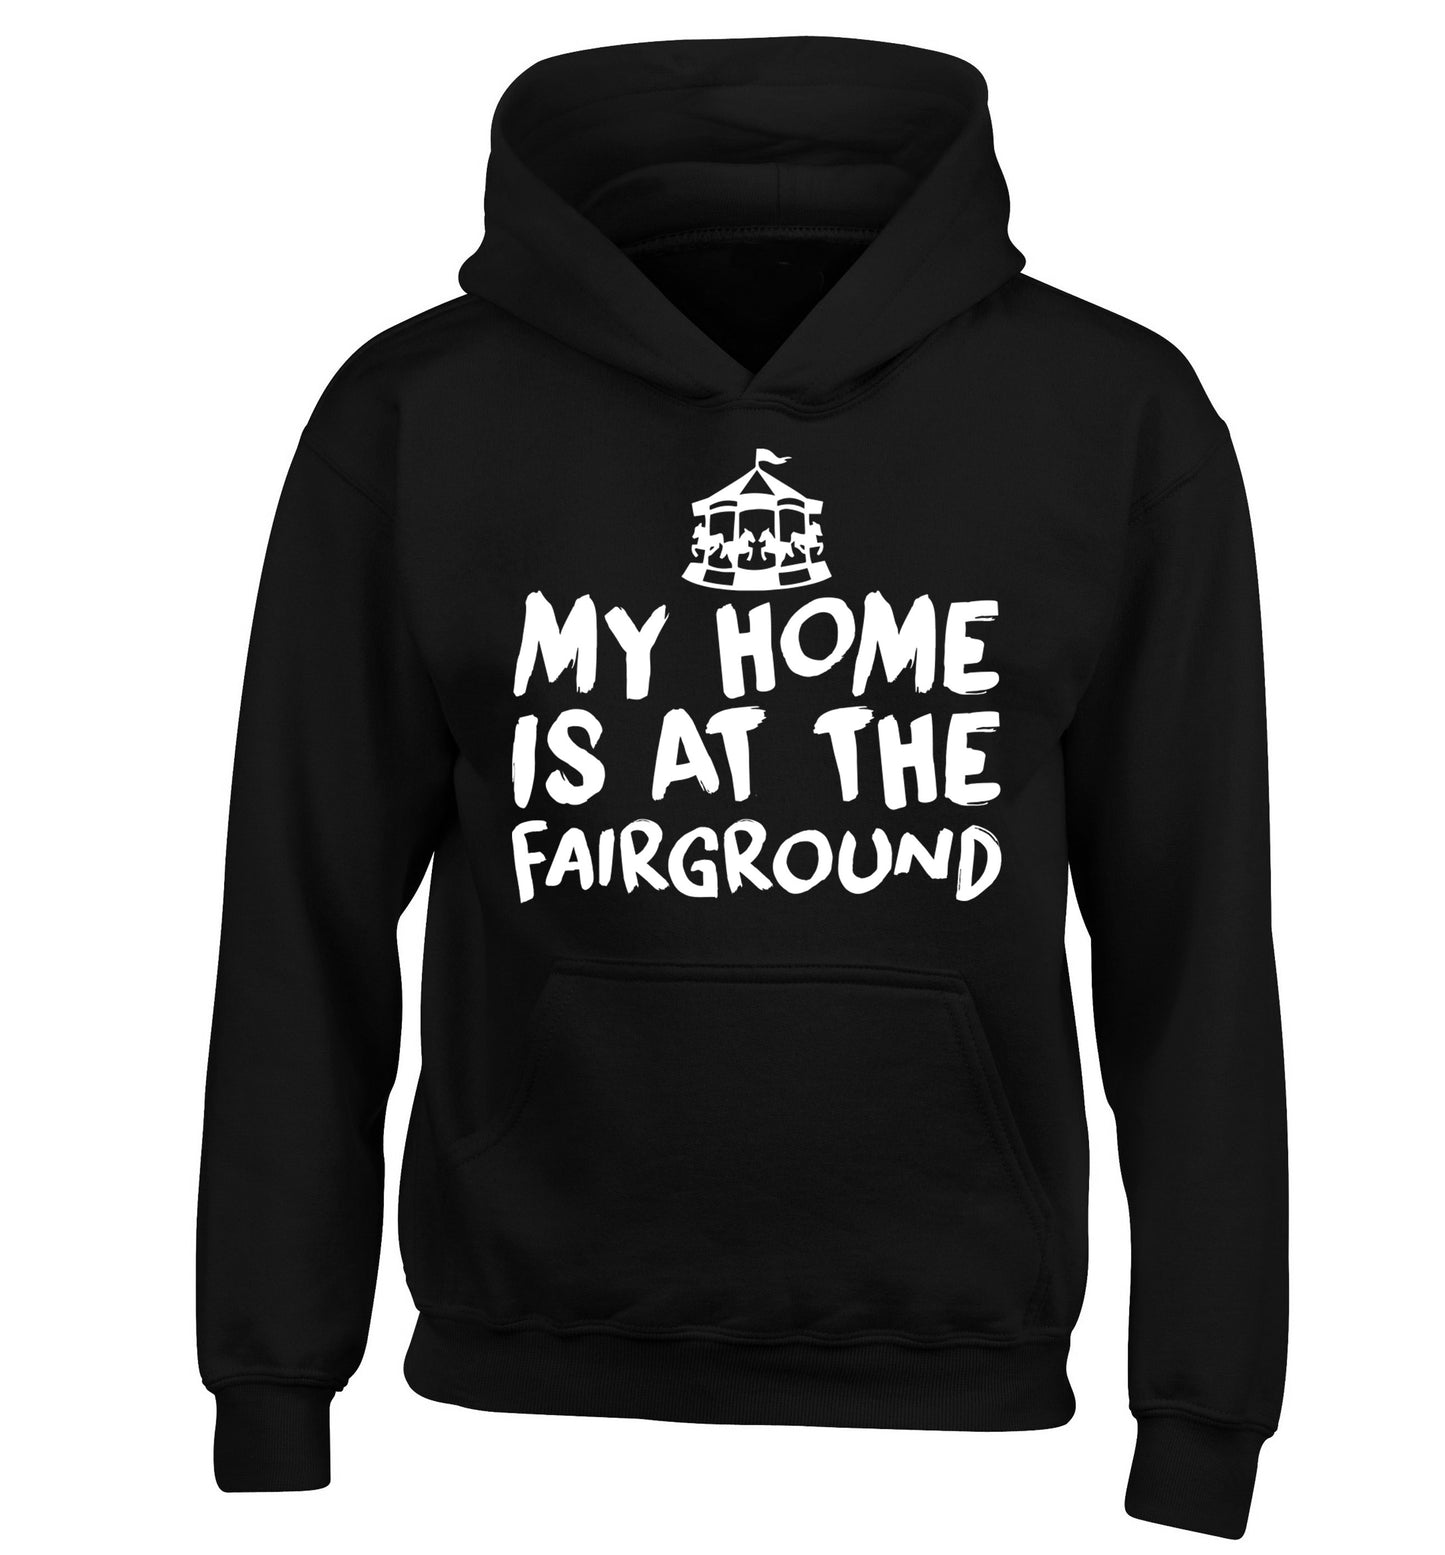 My home is at the fairground children's black hoodie 12-14 Years